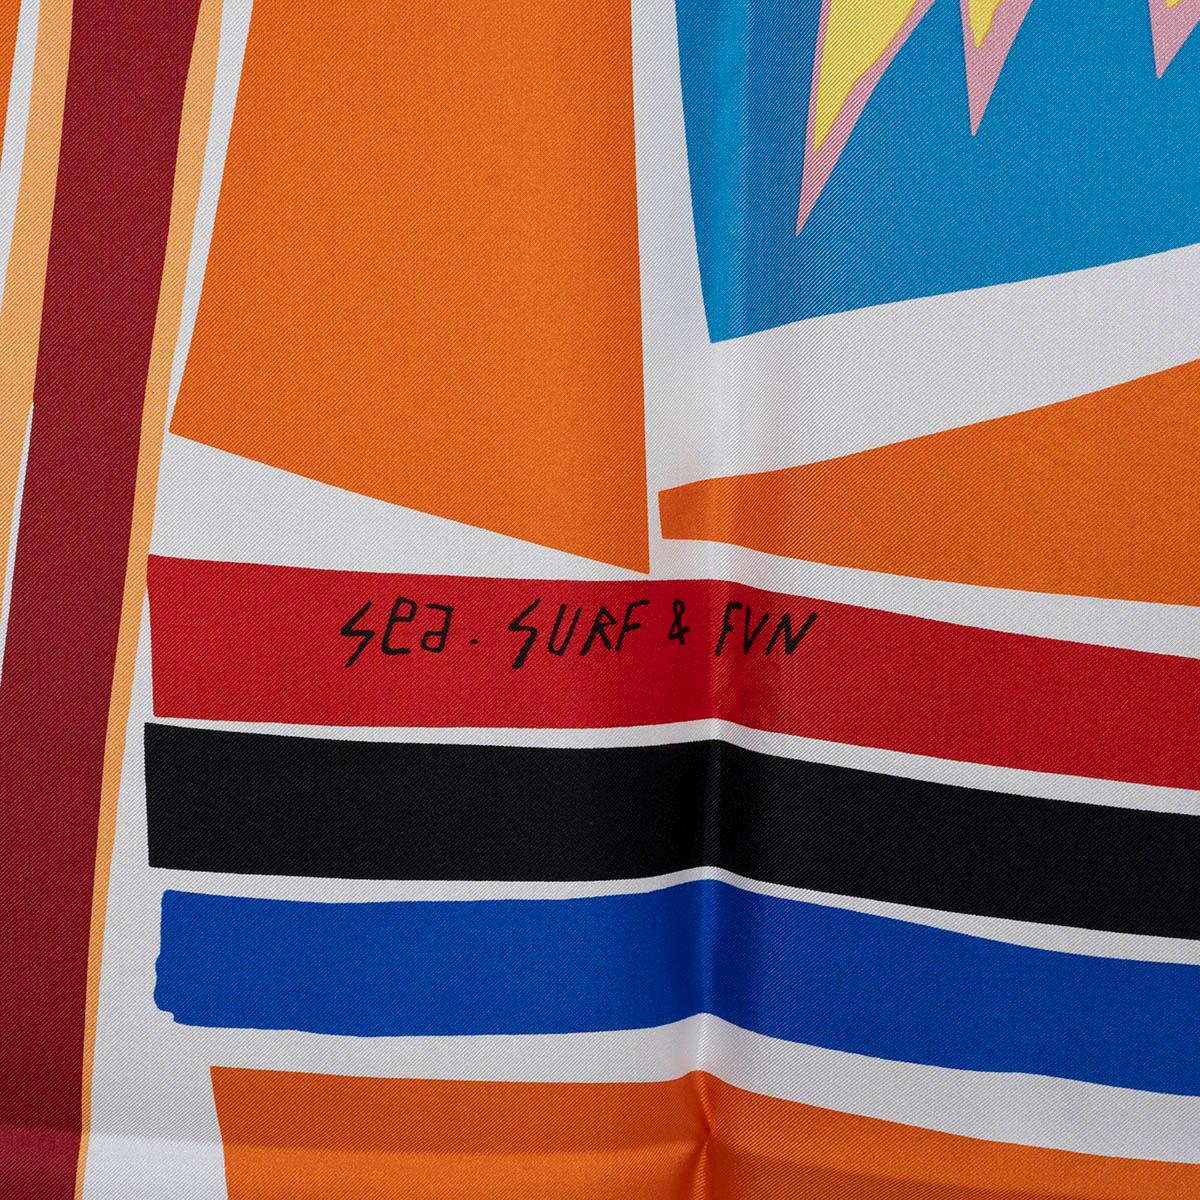 100% authentic Hermès Sea, Surf and Fun 140 scarf by Felipe Jardim in white summer twill silk (100%) with details in orange, blue, yellow and red. Brand new.

Measurements
Model	433161S09
Width	140cm (54.6in)
Height	140cm (54.6in)
The story